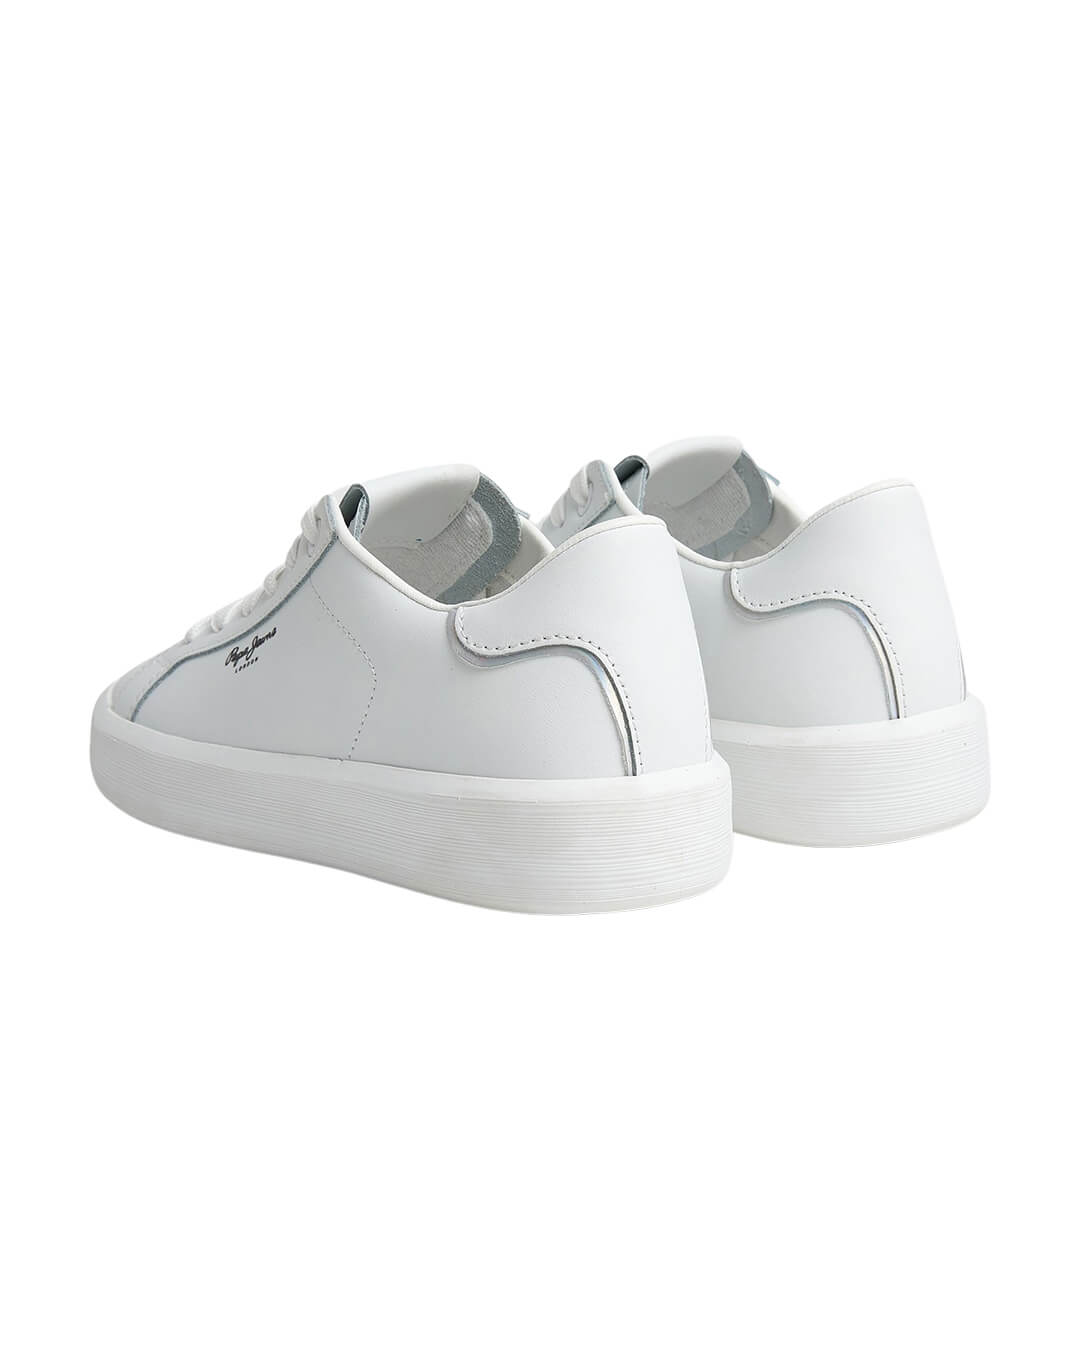 Pepe Jeans Shoes Pepe Jeans Dobbie White Bass Sneakers